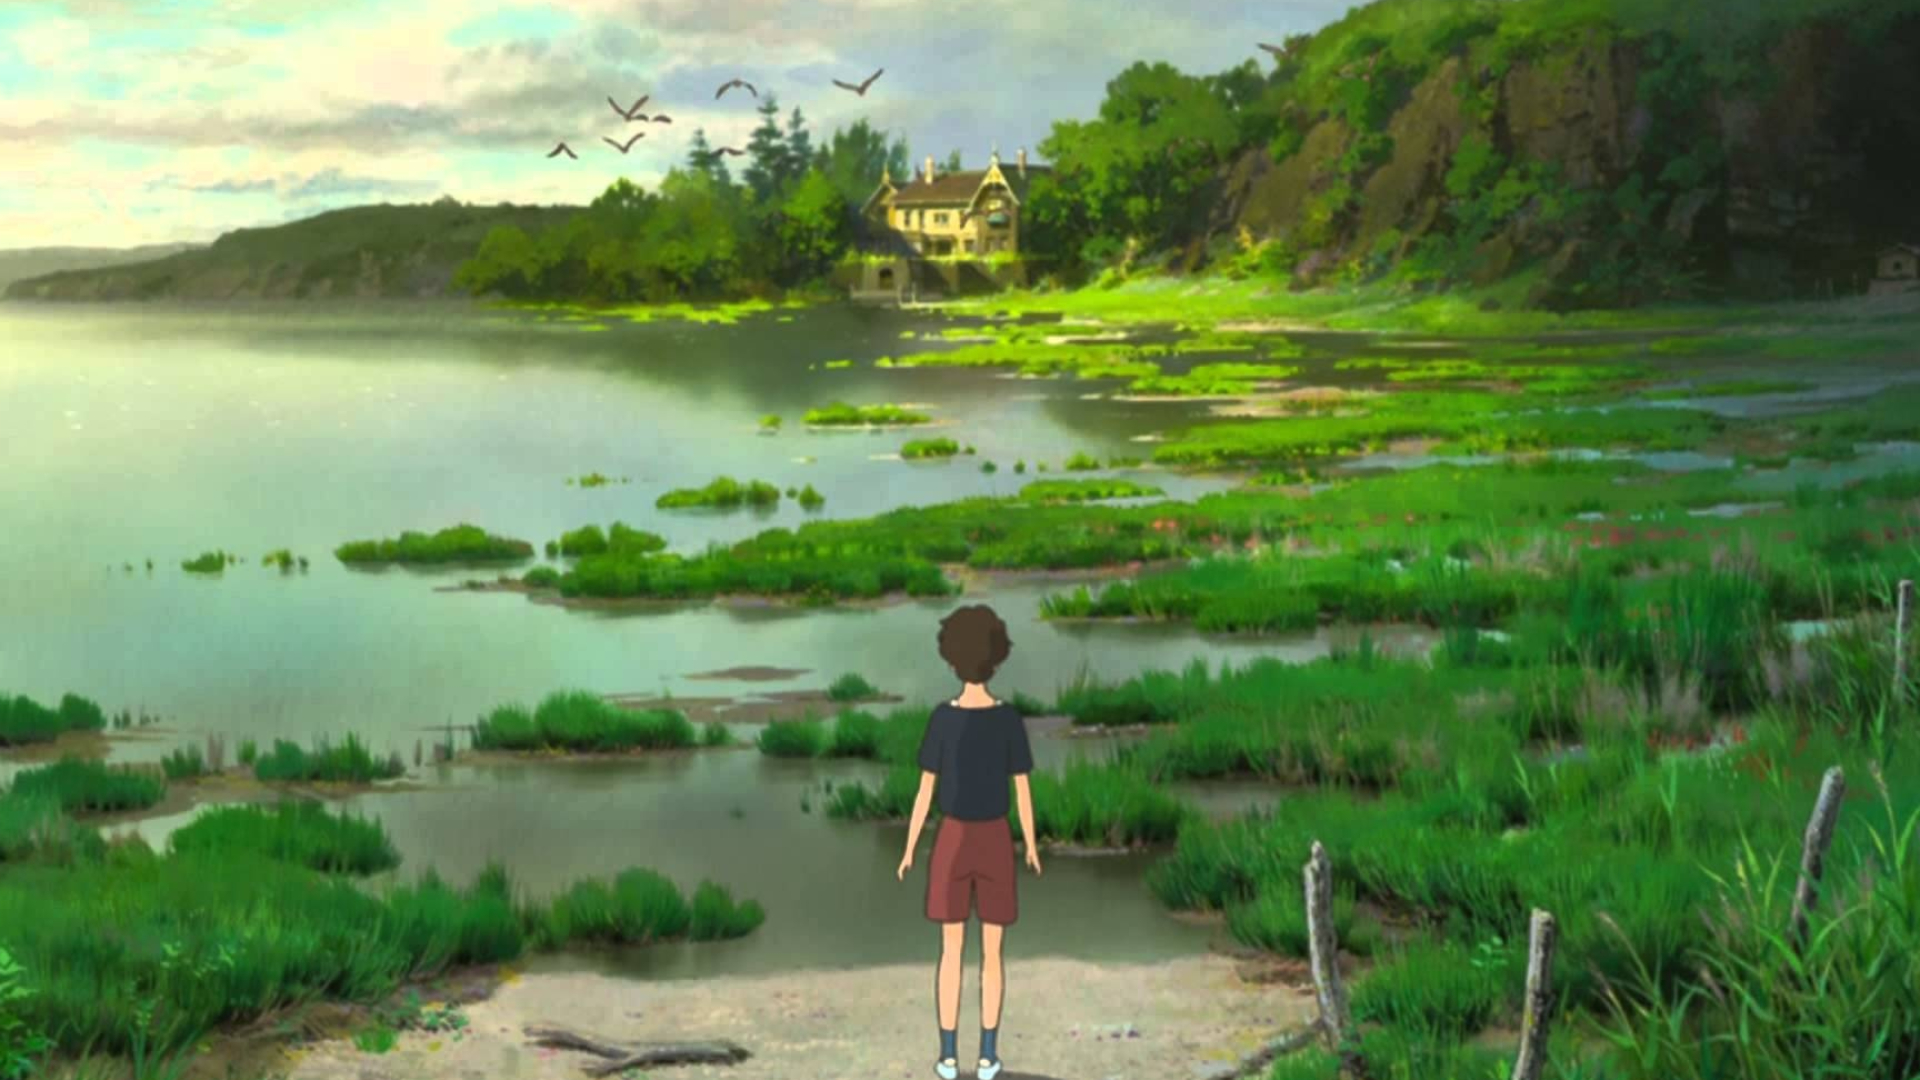 When Marnie Was There (Anime): Novel exploring themes of alienation, loneliness, and forgiveness in childhood. 1920x1080 Full HD Background.